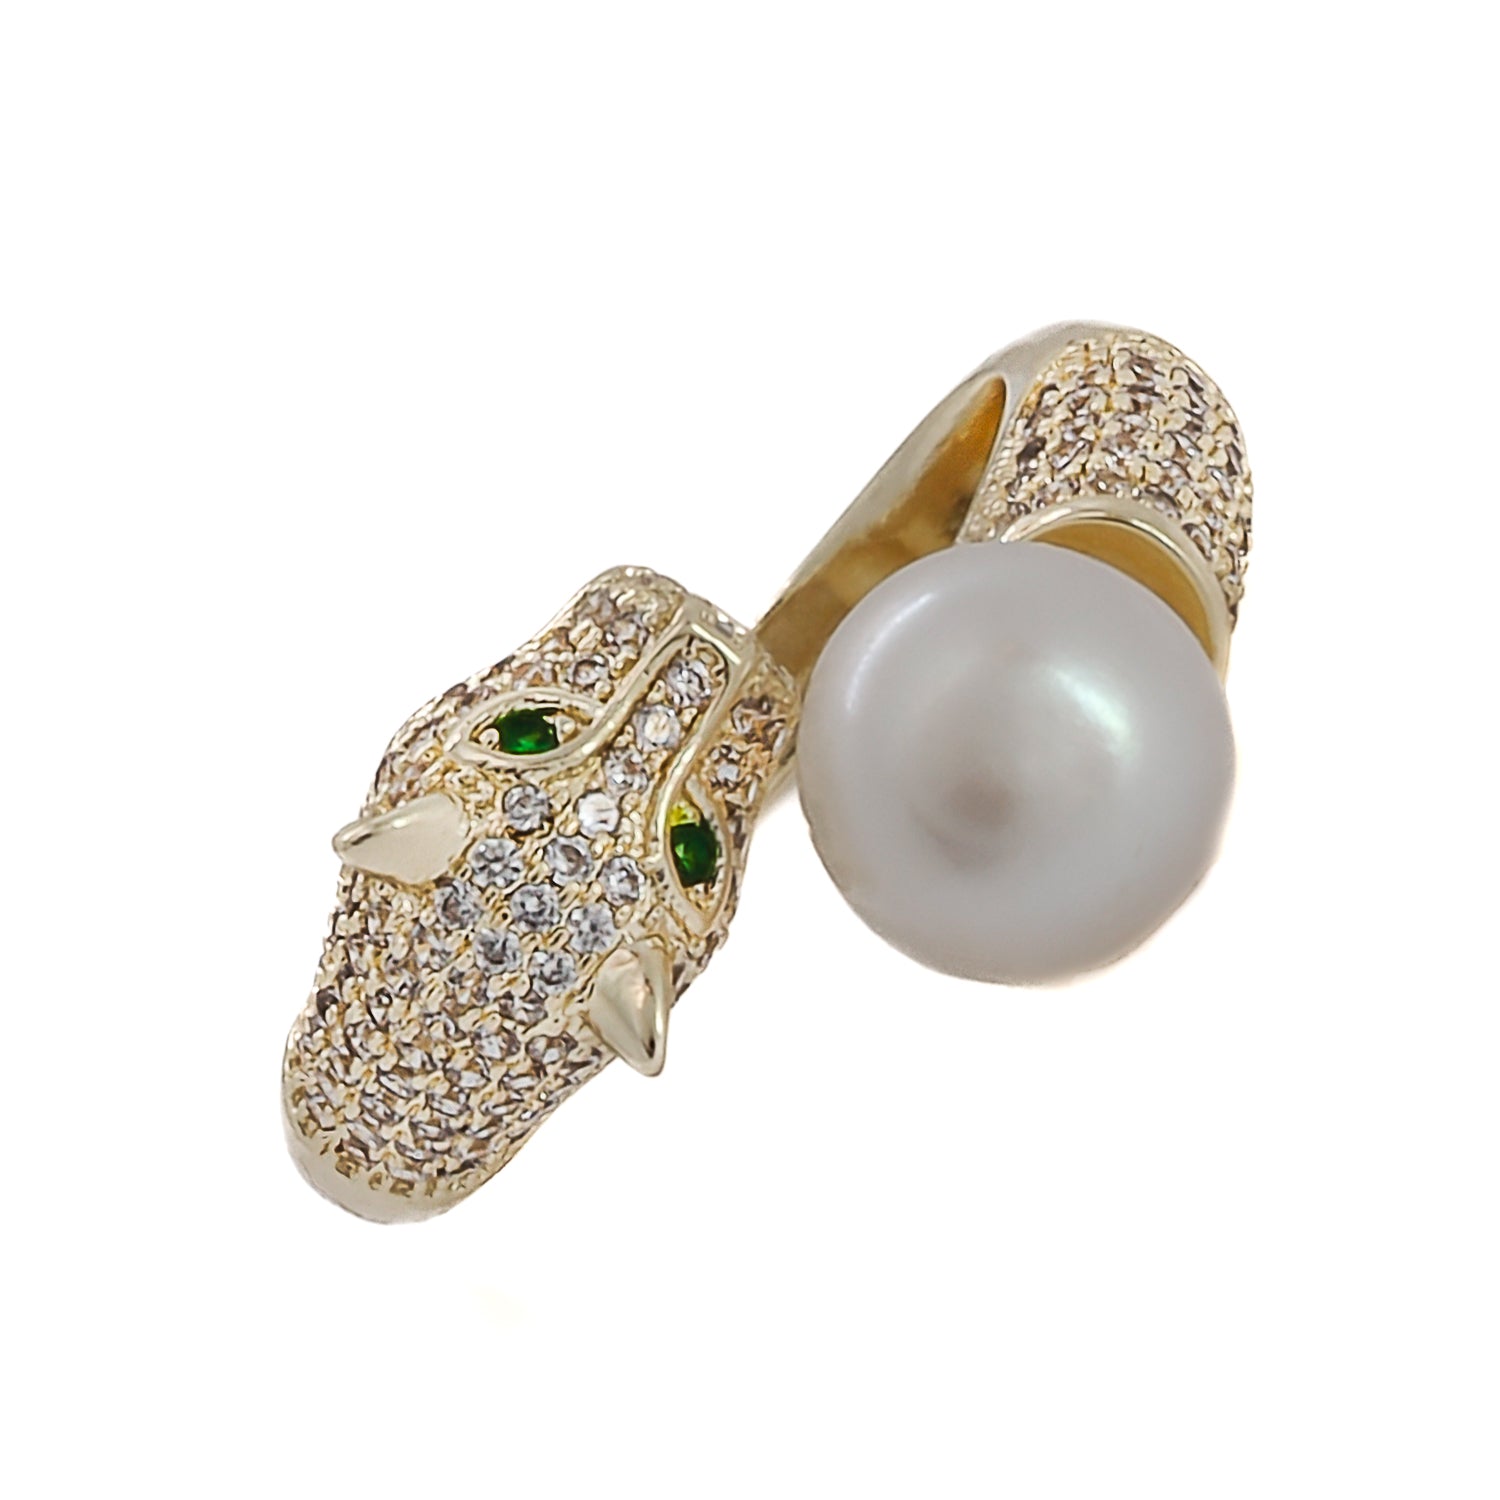 Pearl and Emerald Panther Ring - Captivating Gaze and Allure